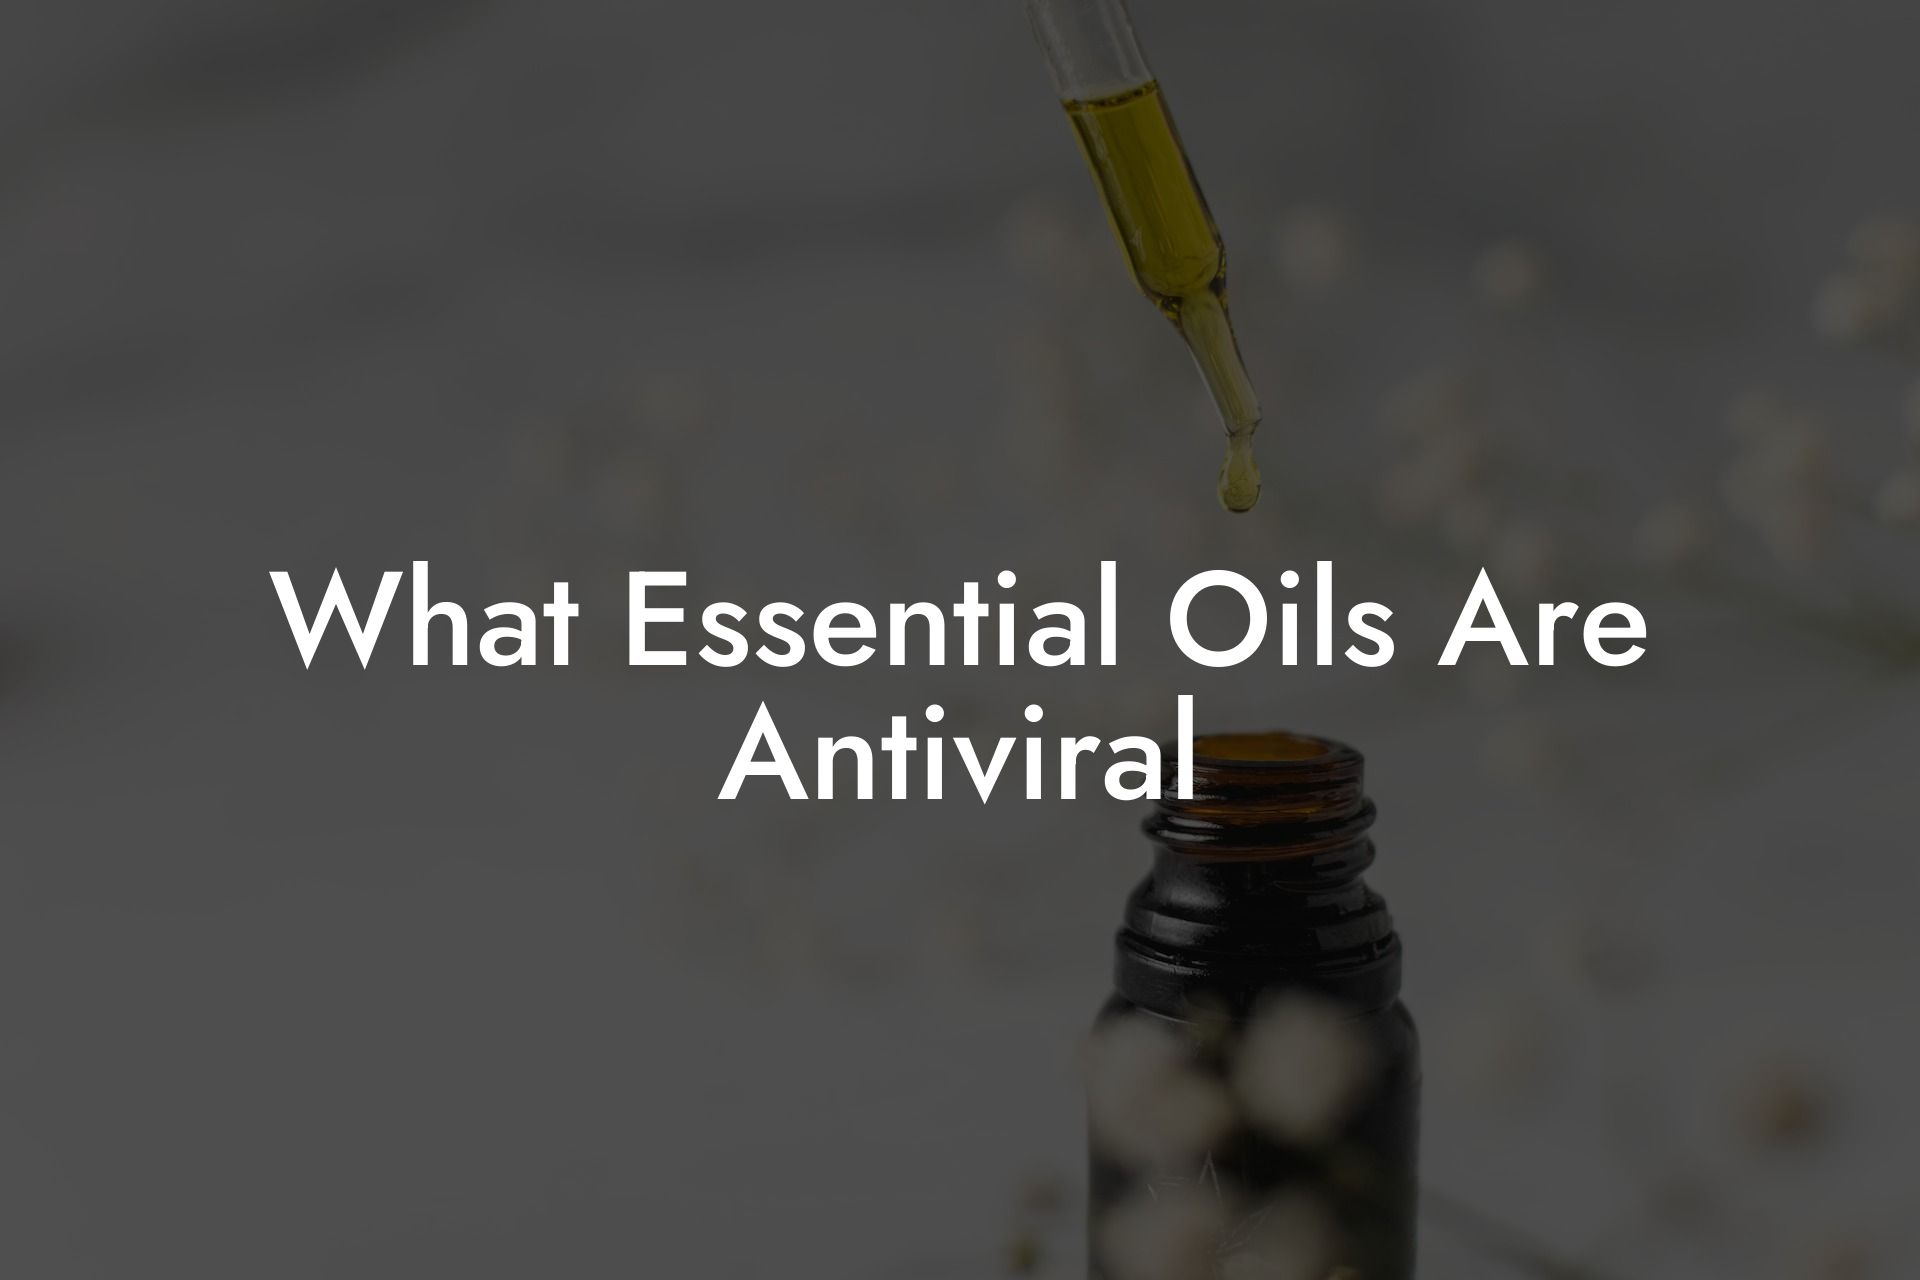 What Essential Oils Are Antiviral